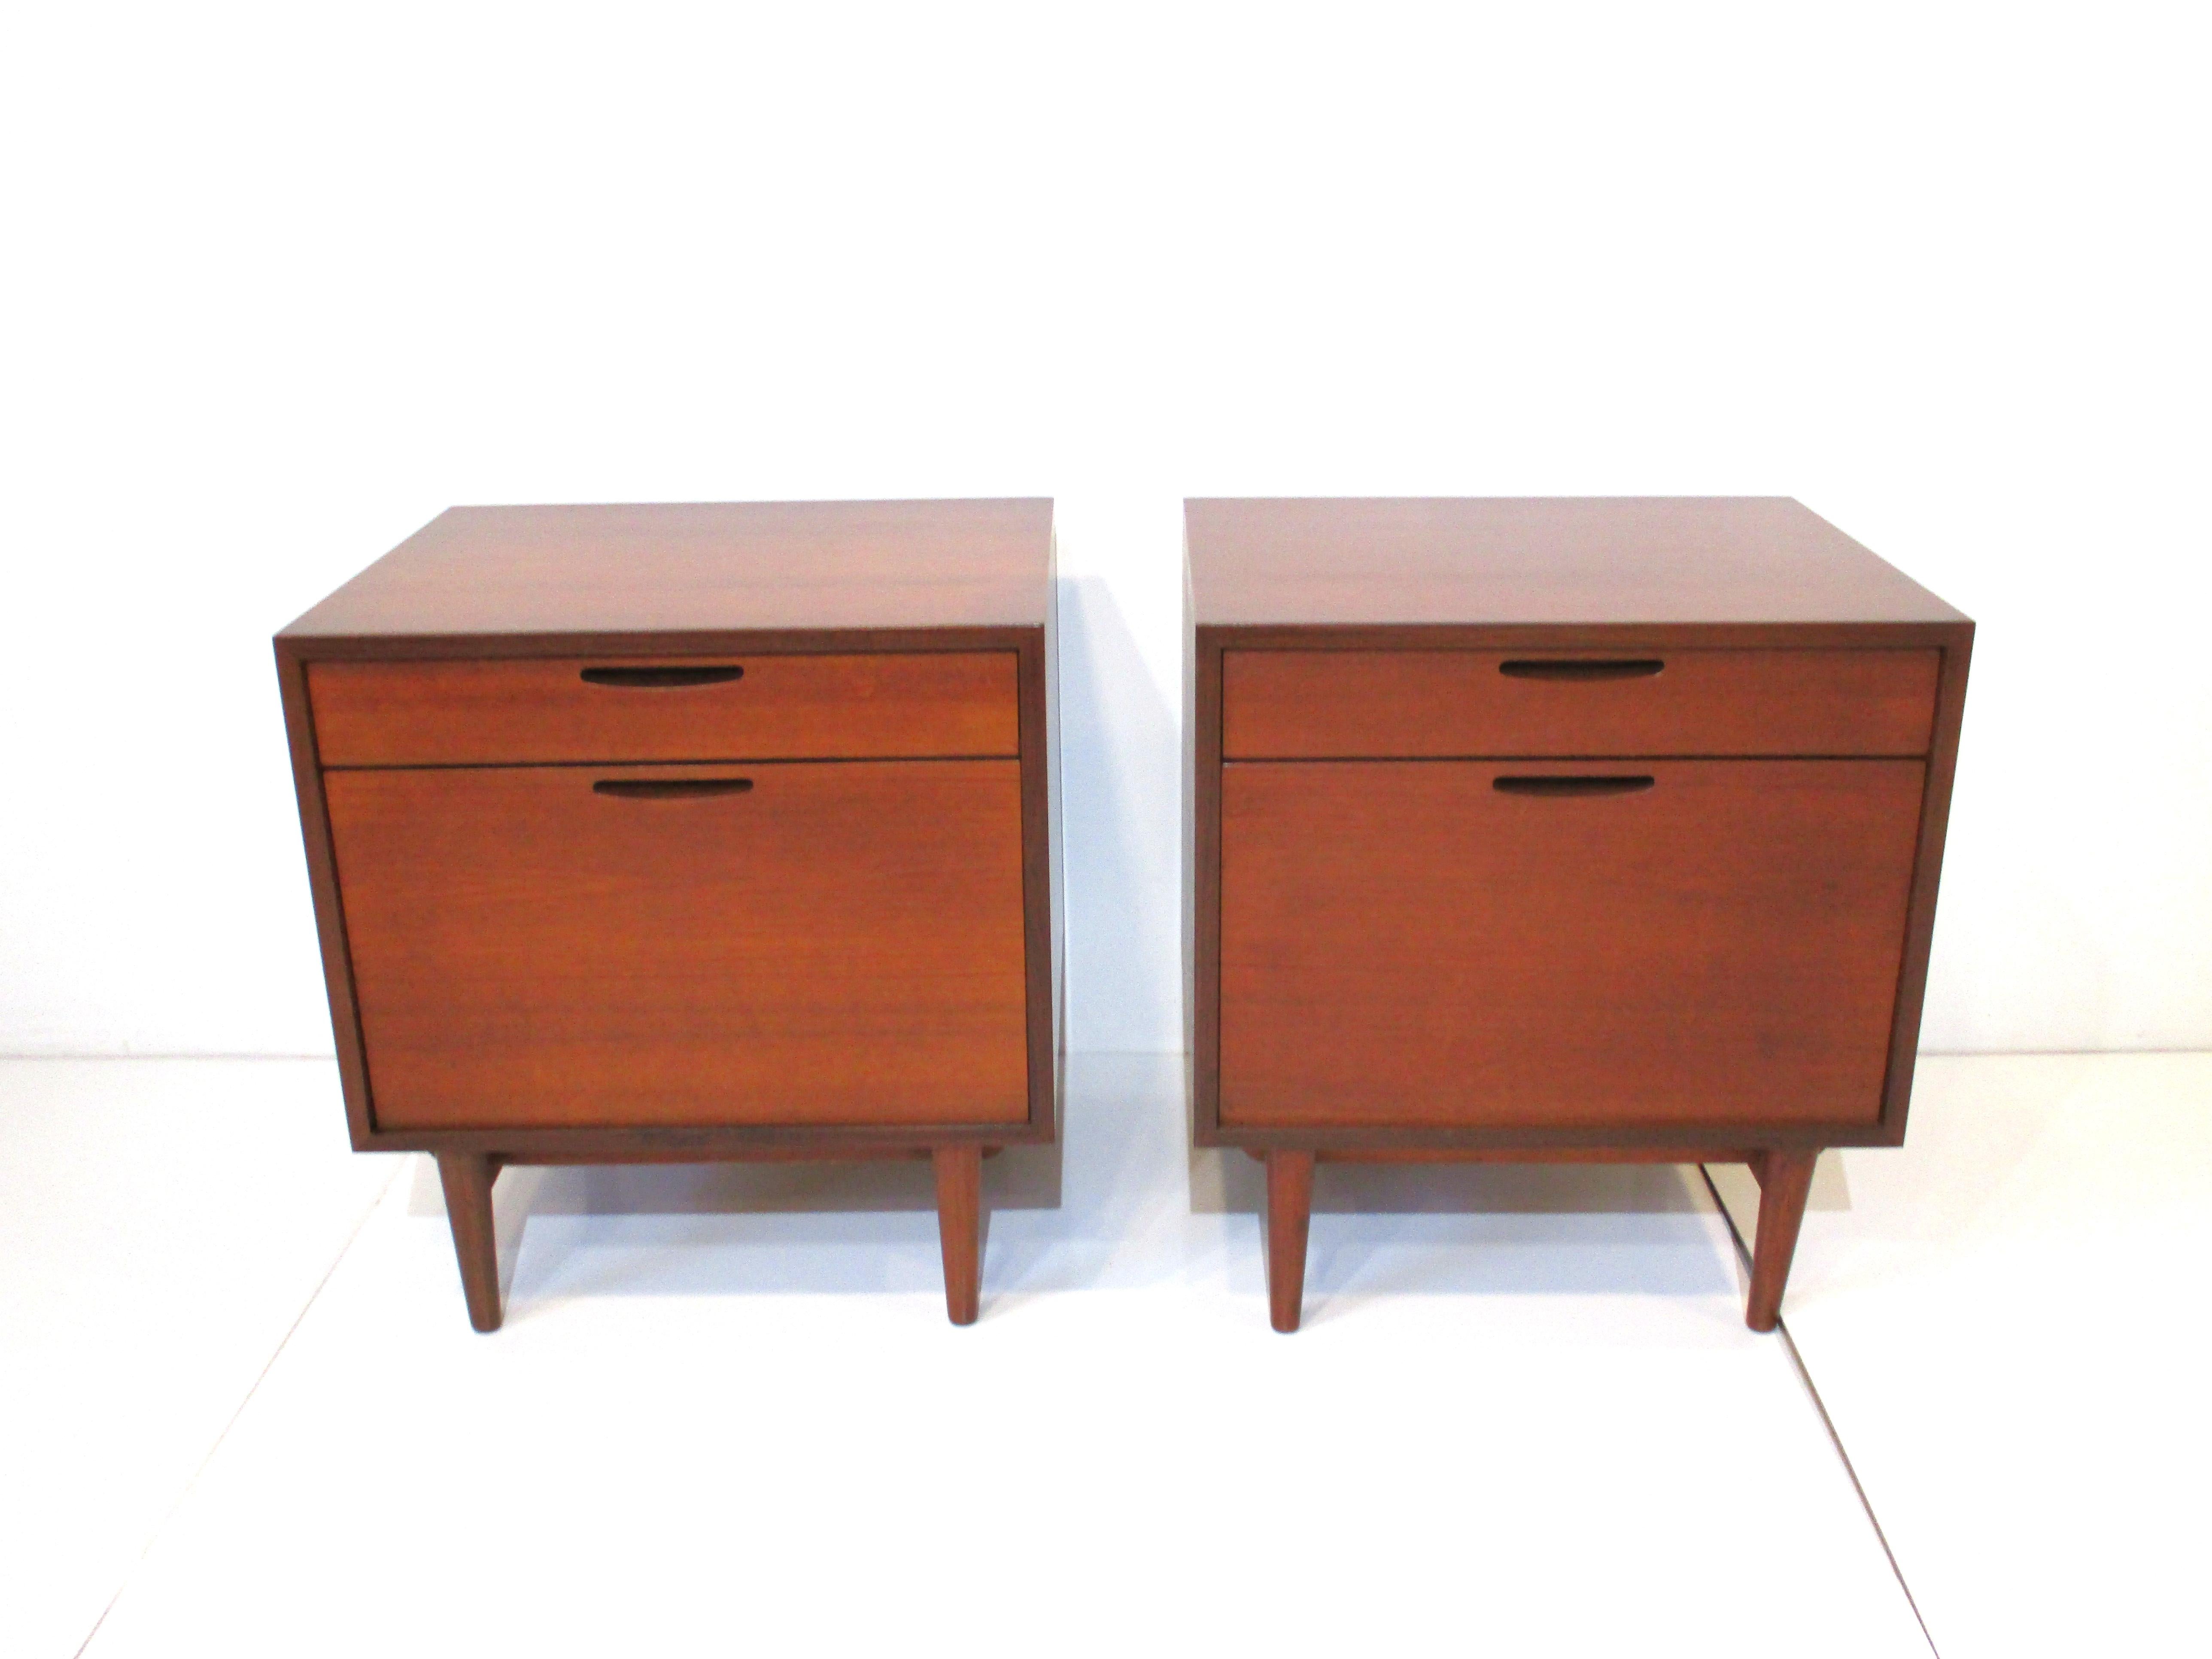 A matching pair of rare IB Kofod - Larsen teak wood nightstands / side table cabinets with top drawer and flap down lower door with storage. The flap door has brass hinges and contrasting wood grain giving the piece a wonderful design aesthetic, a